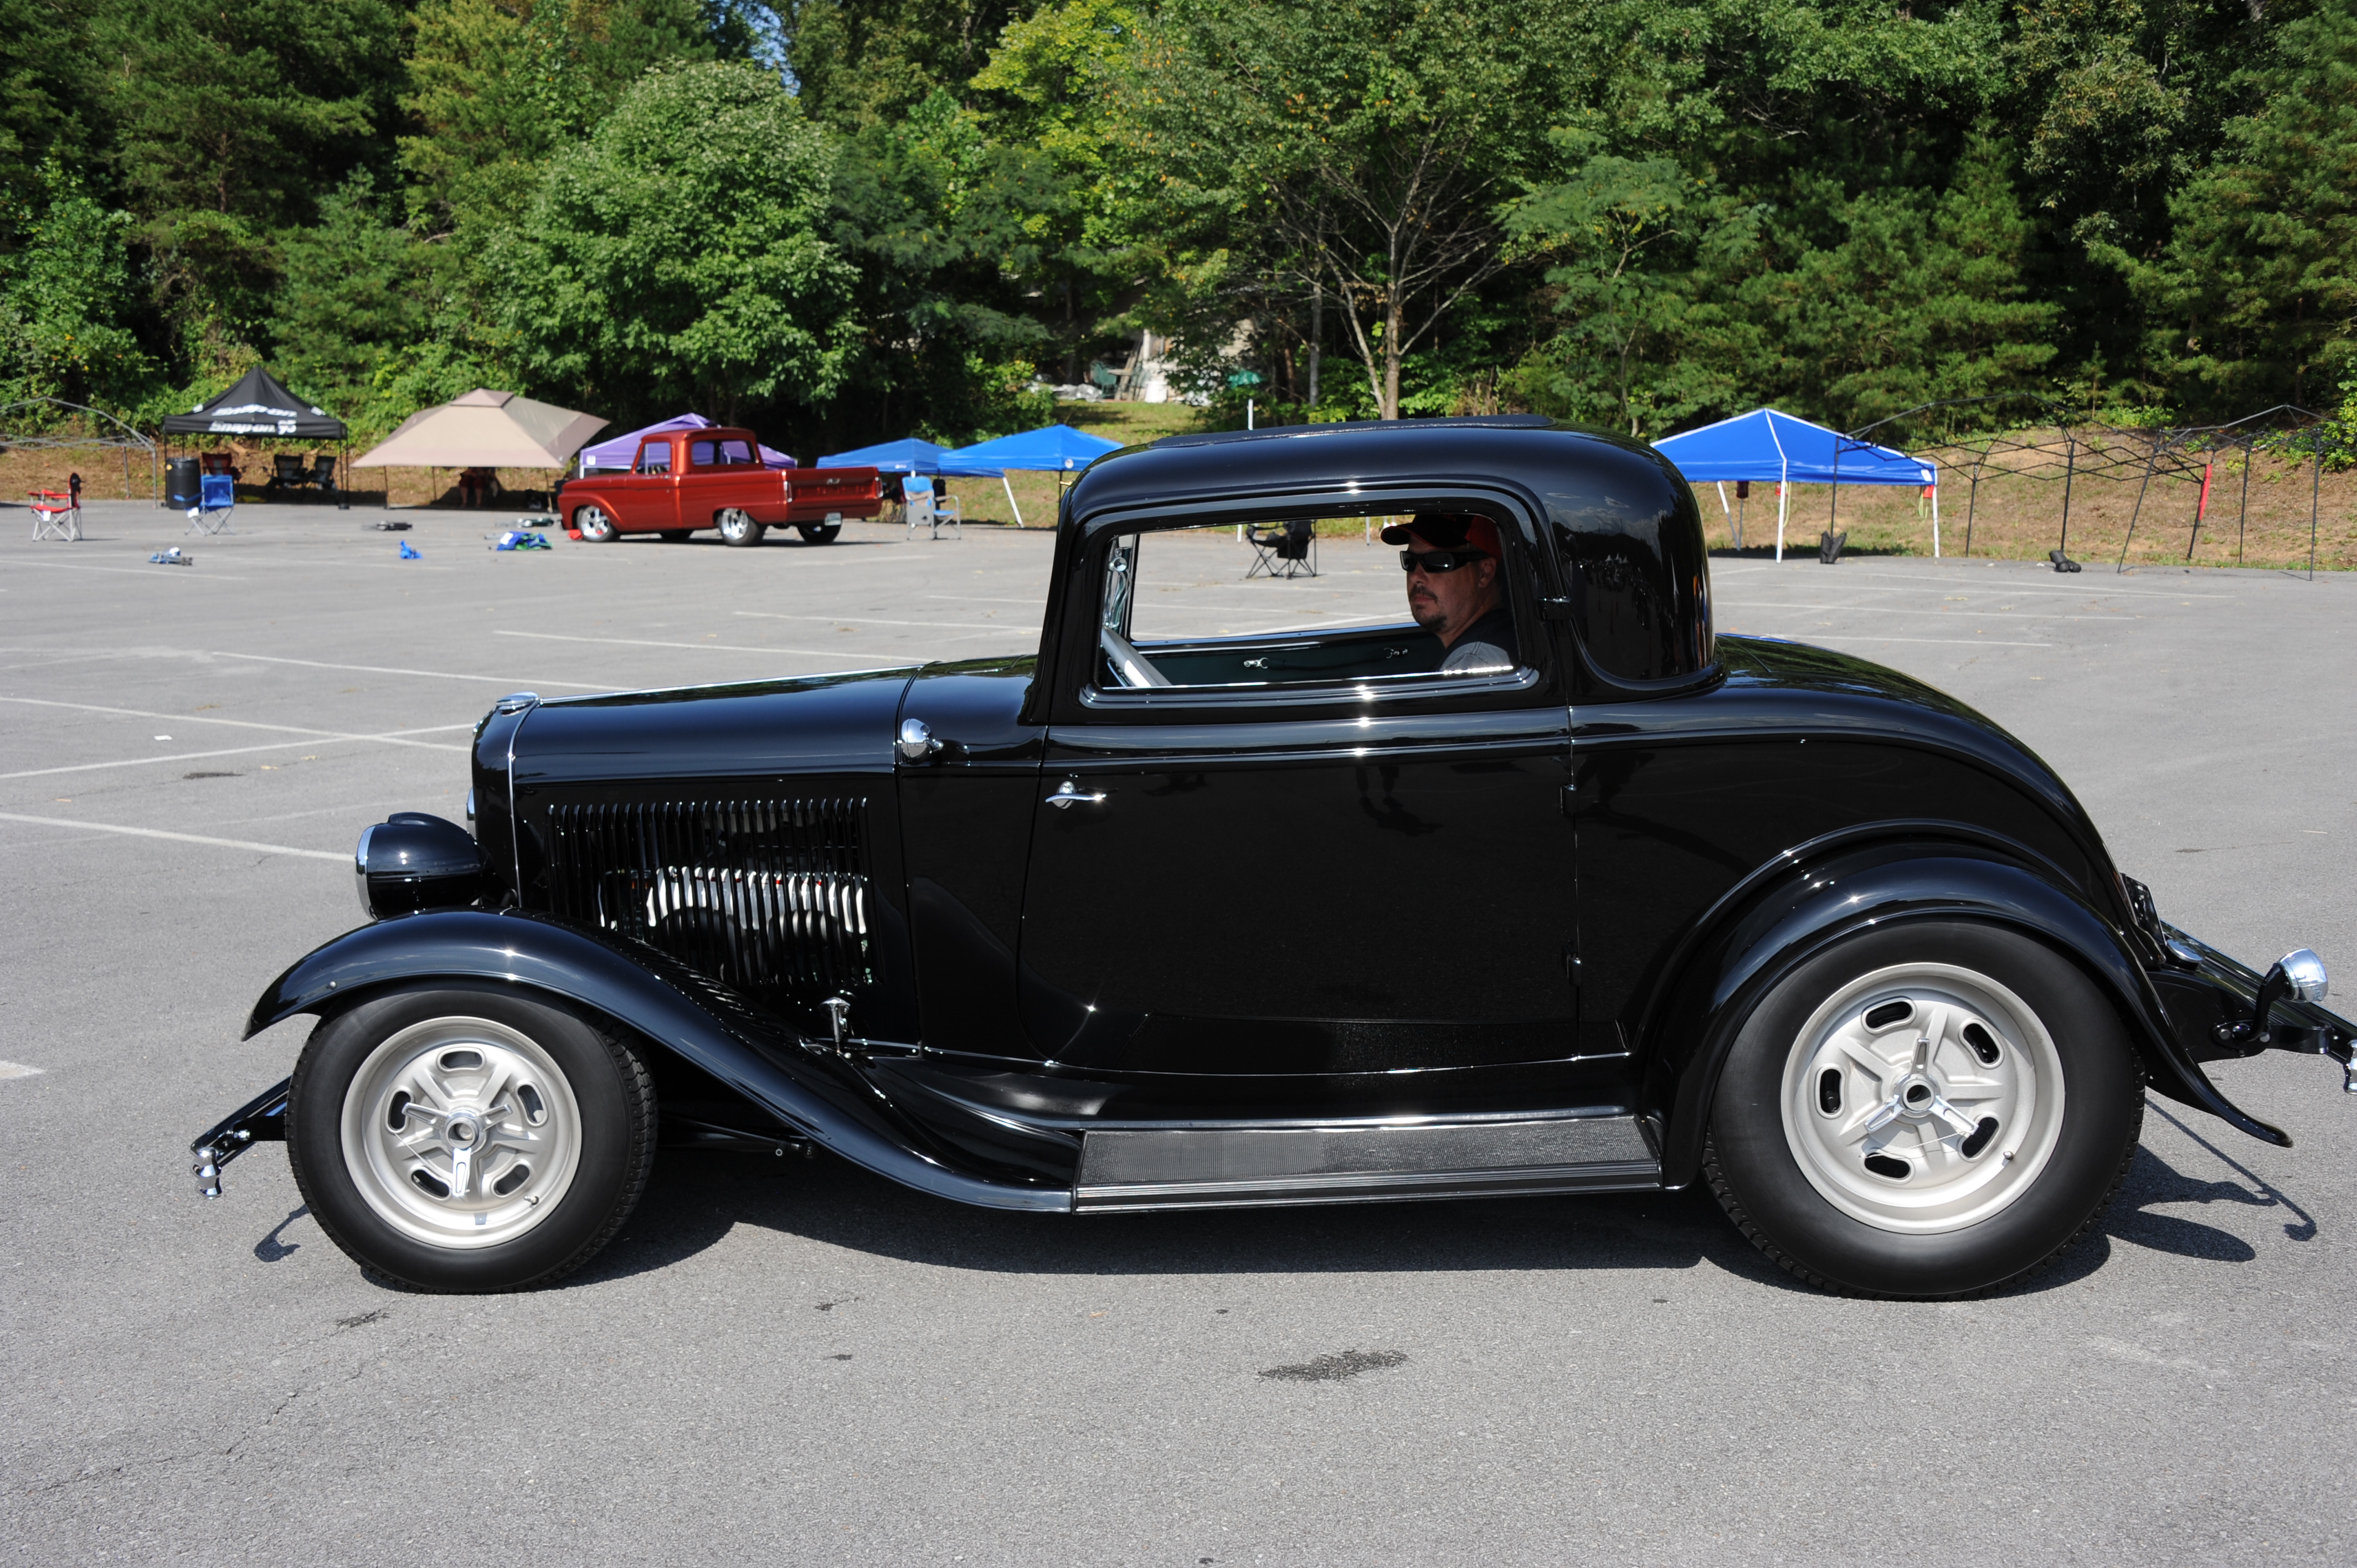 Dick Bridges - '32 Ford - Shades of the Past, Pigeon Forge